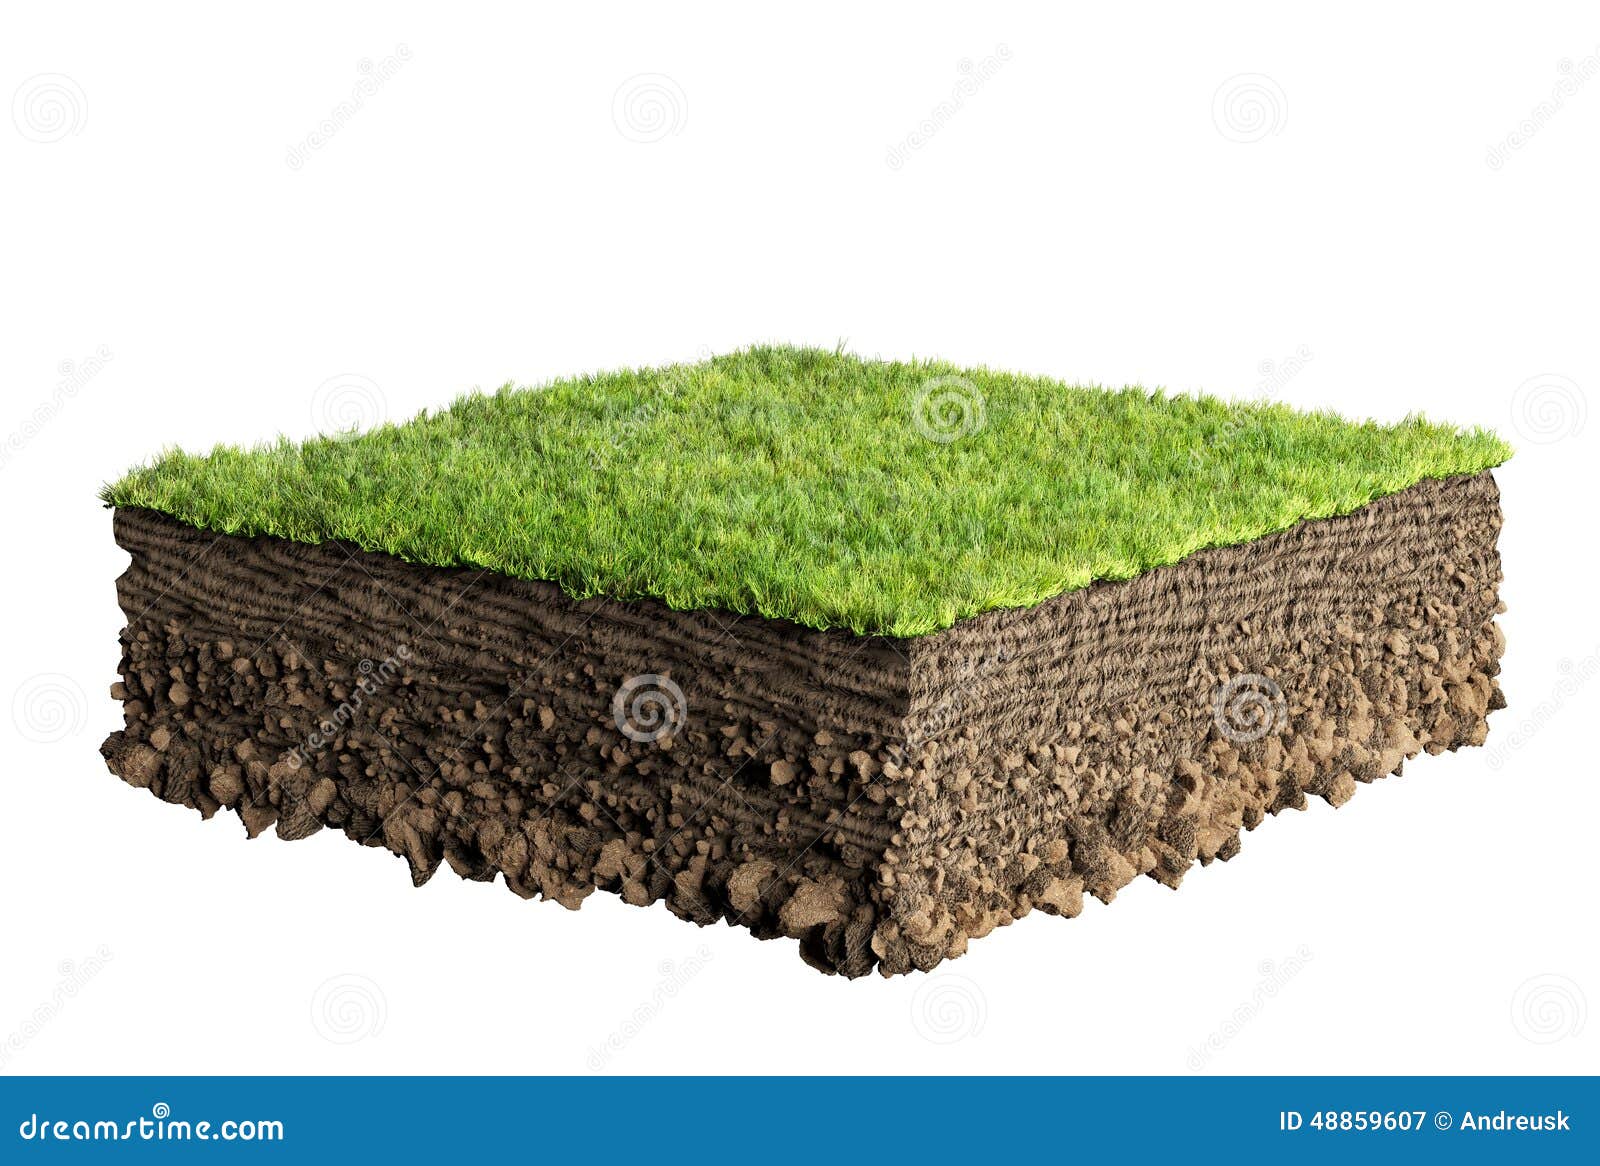 grass and soil profile